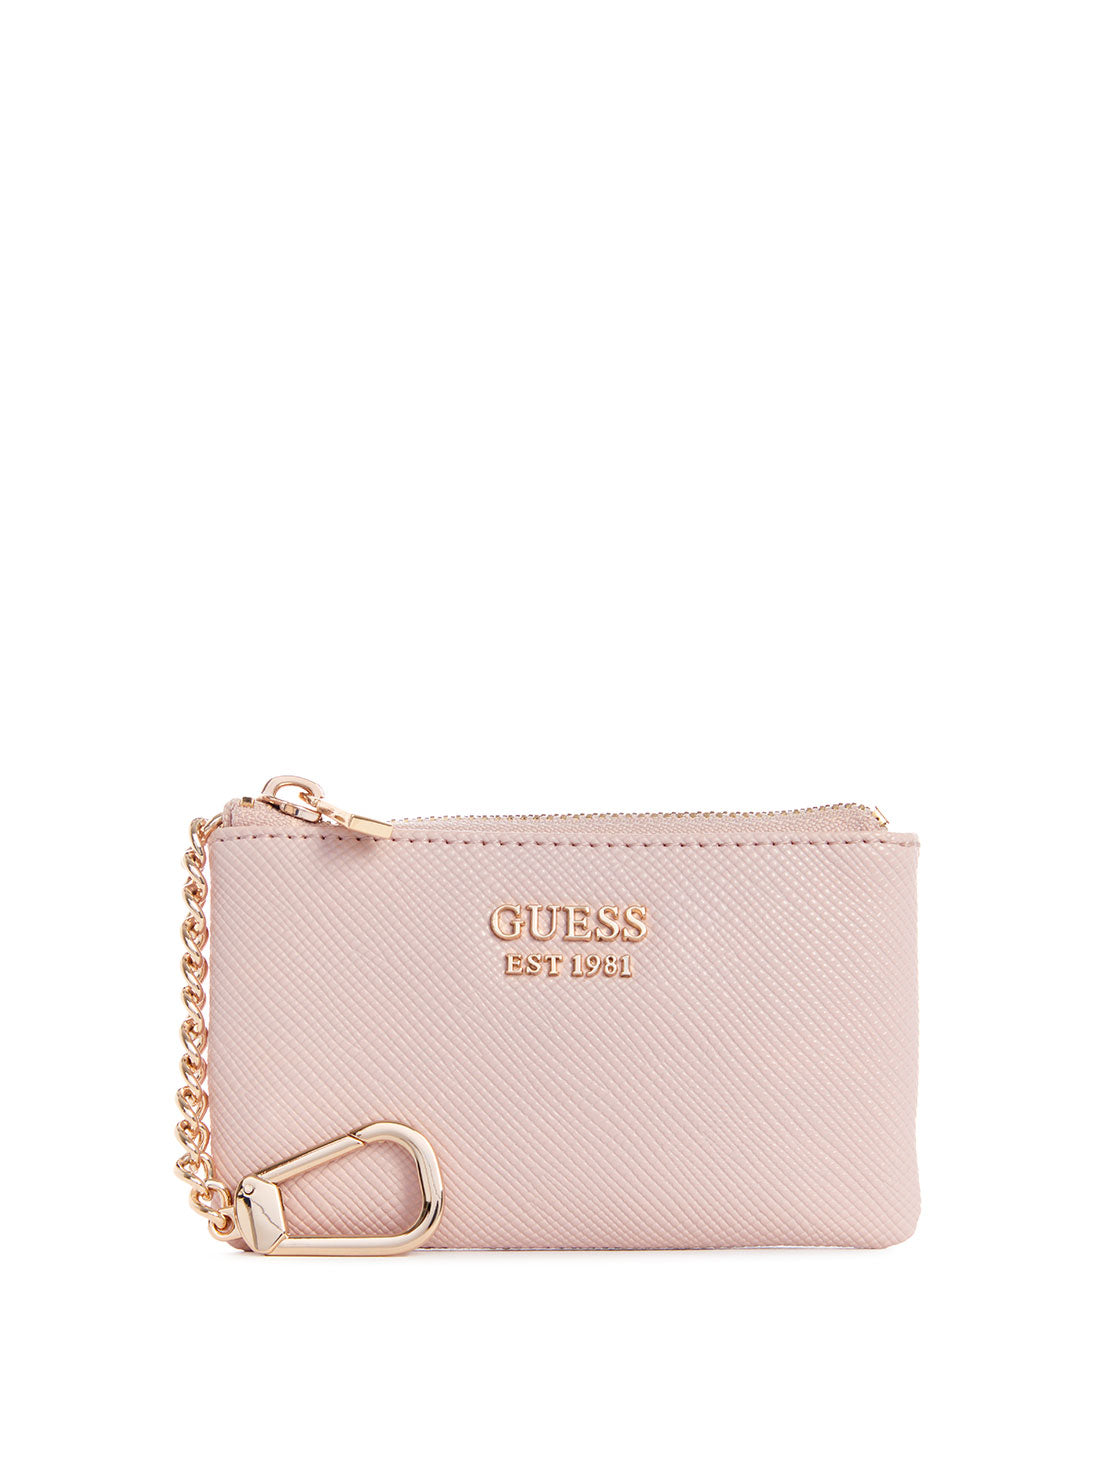 GUESS Pink Laurel Zip Pouch front view